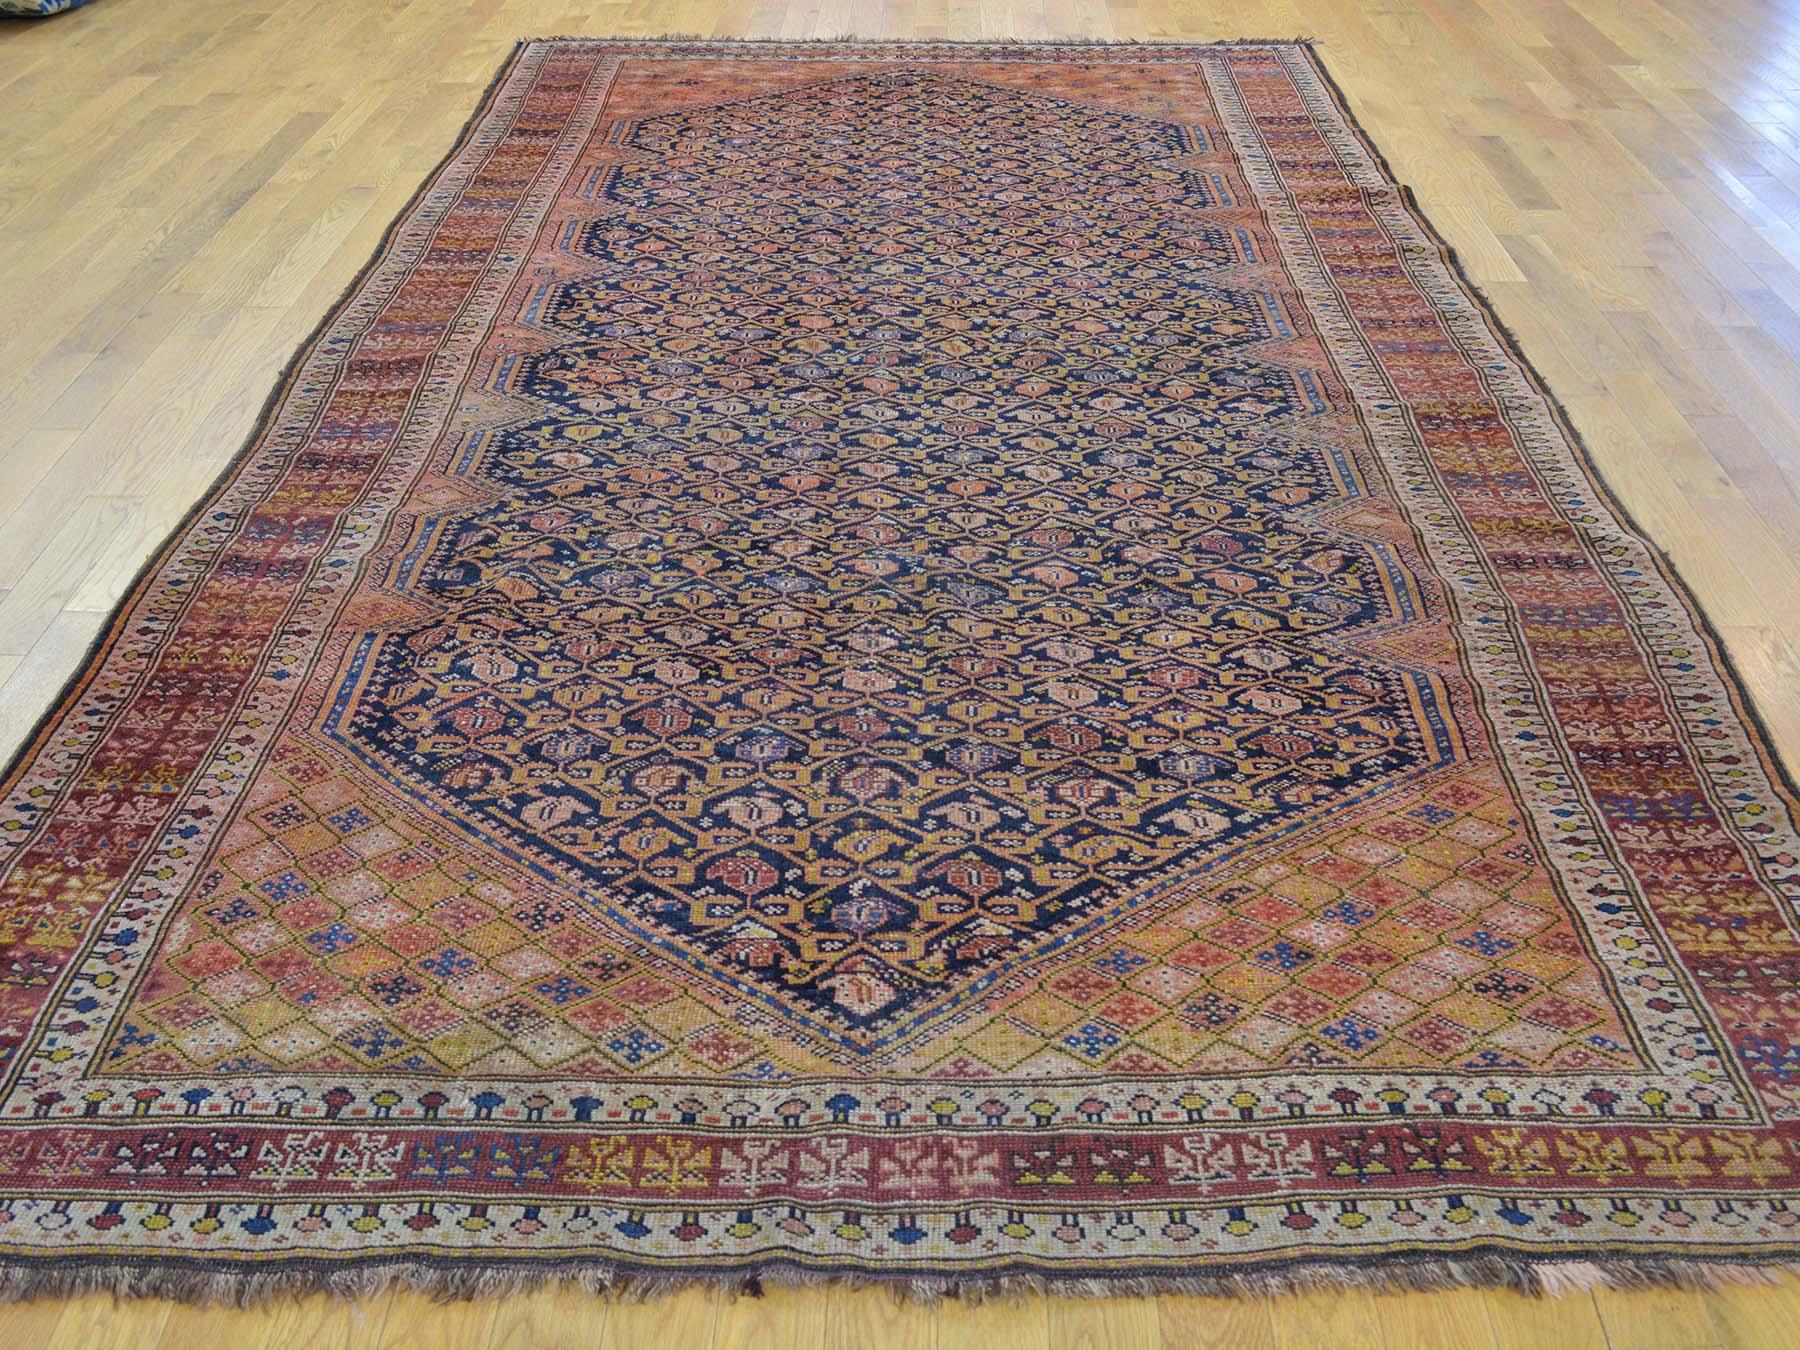 This is a genuine hand knotted oriental rug. It is not hand tufted or machine made rug. Our entire inventory is made of either hand knotted or handwoven rugs.

Start a new room with this superb gallery size carpet. This handcrafted antique